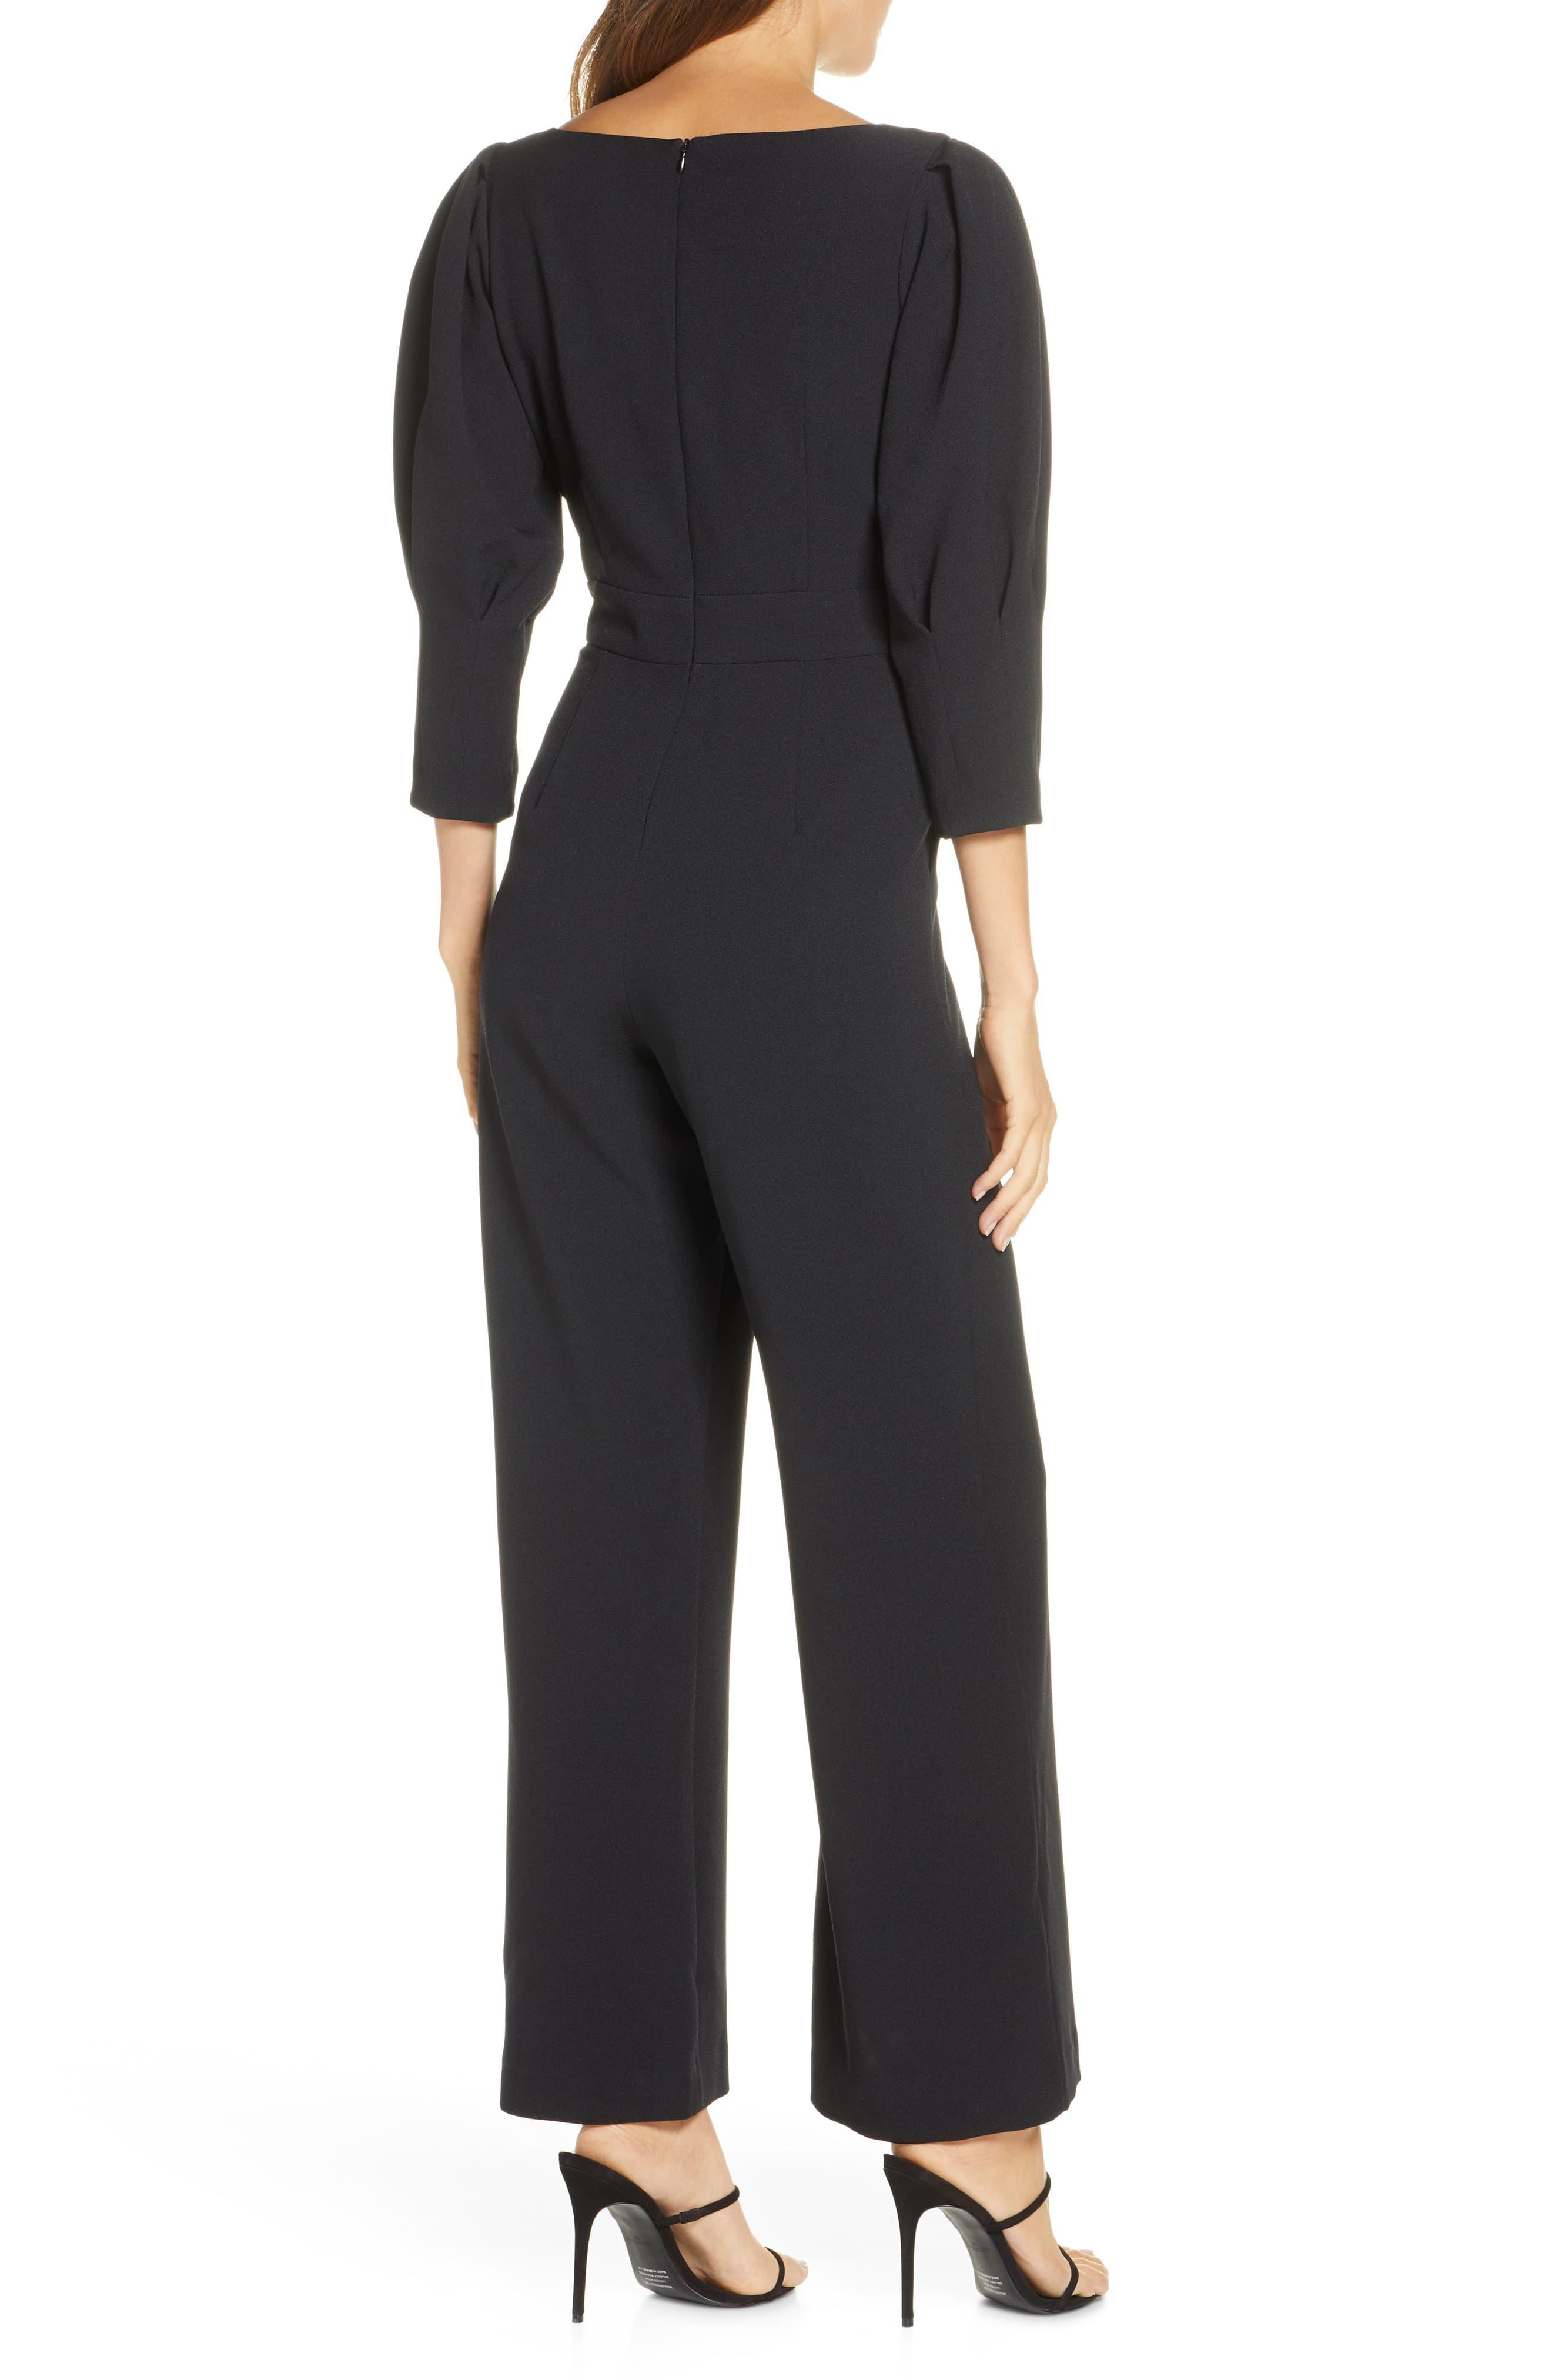 Vince Camuto Puff Sleeve Crepe Jumpsuit in Black - Lyst